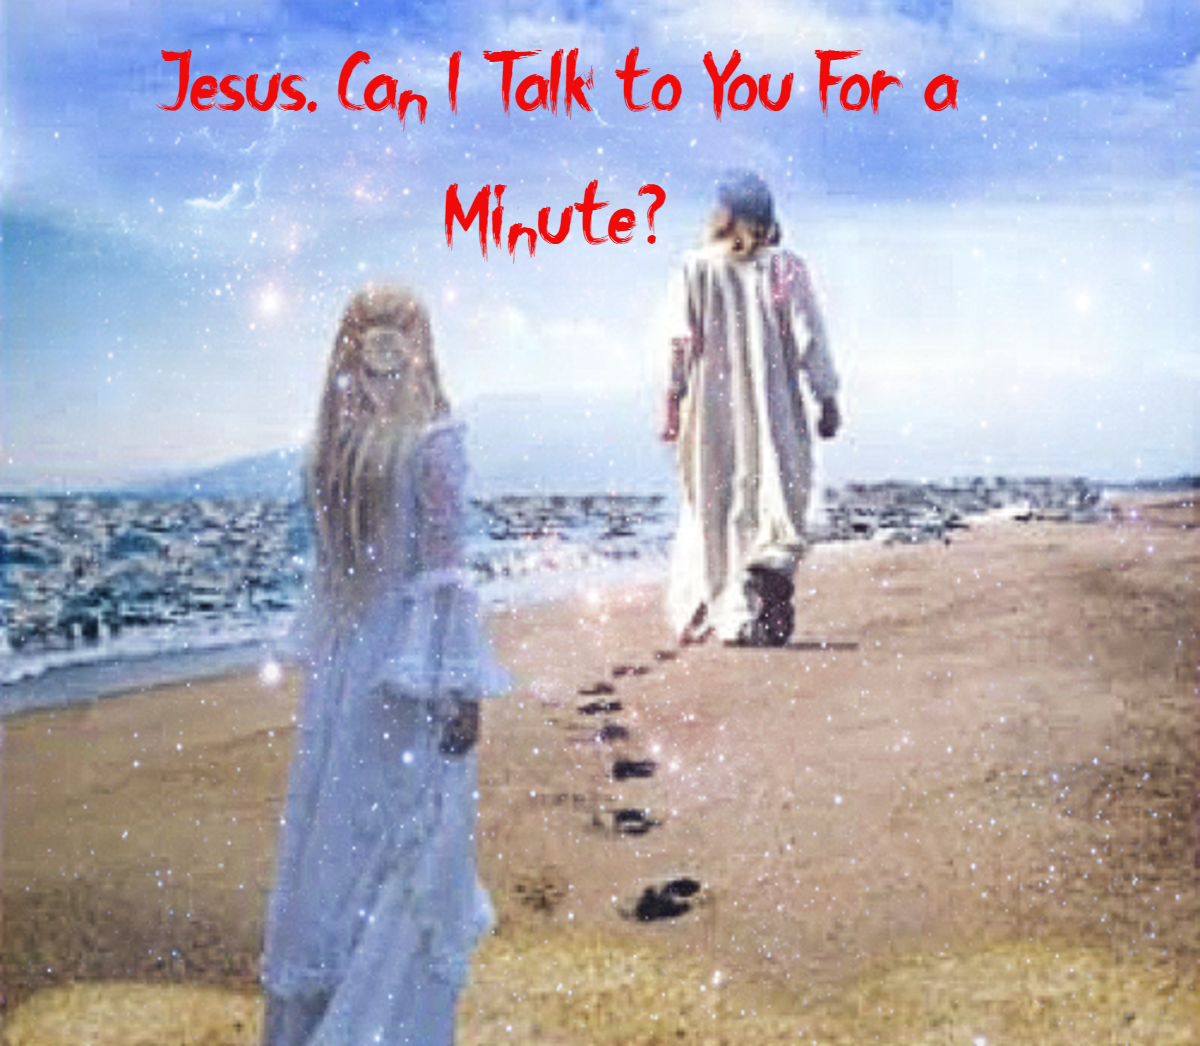 Jesus, Can I Talk to You for a Minute?